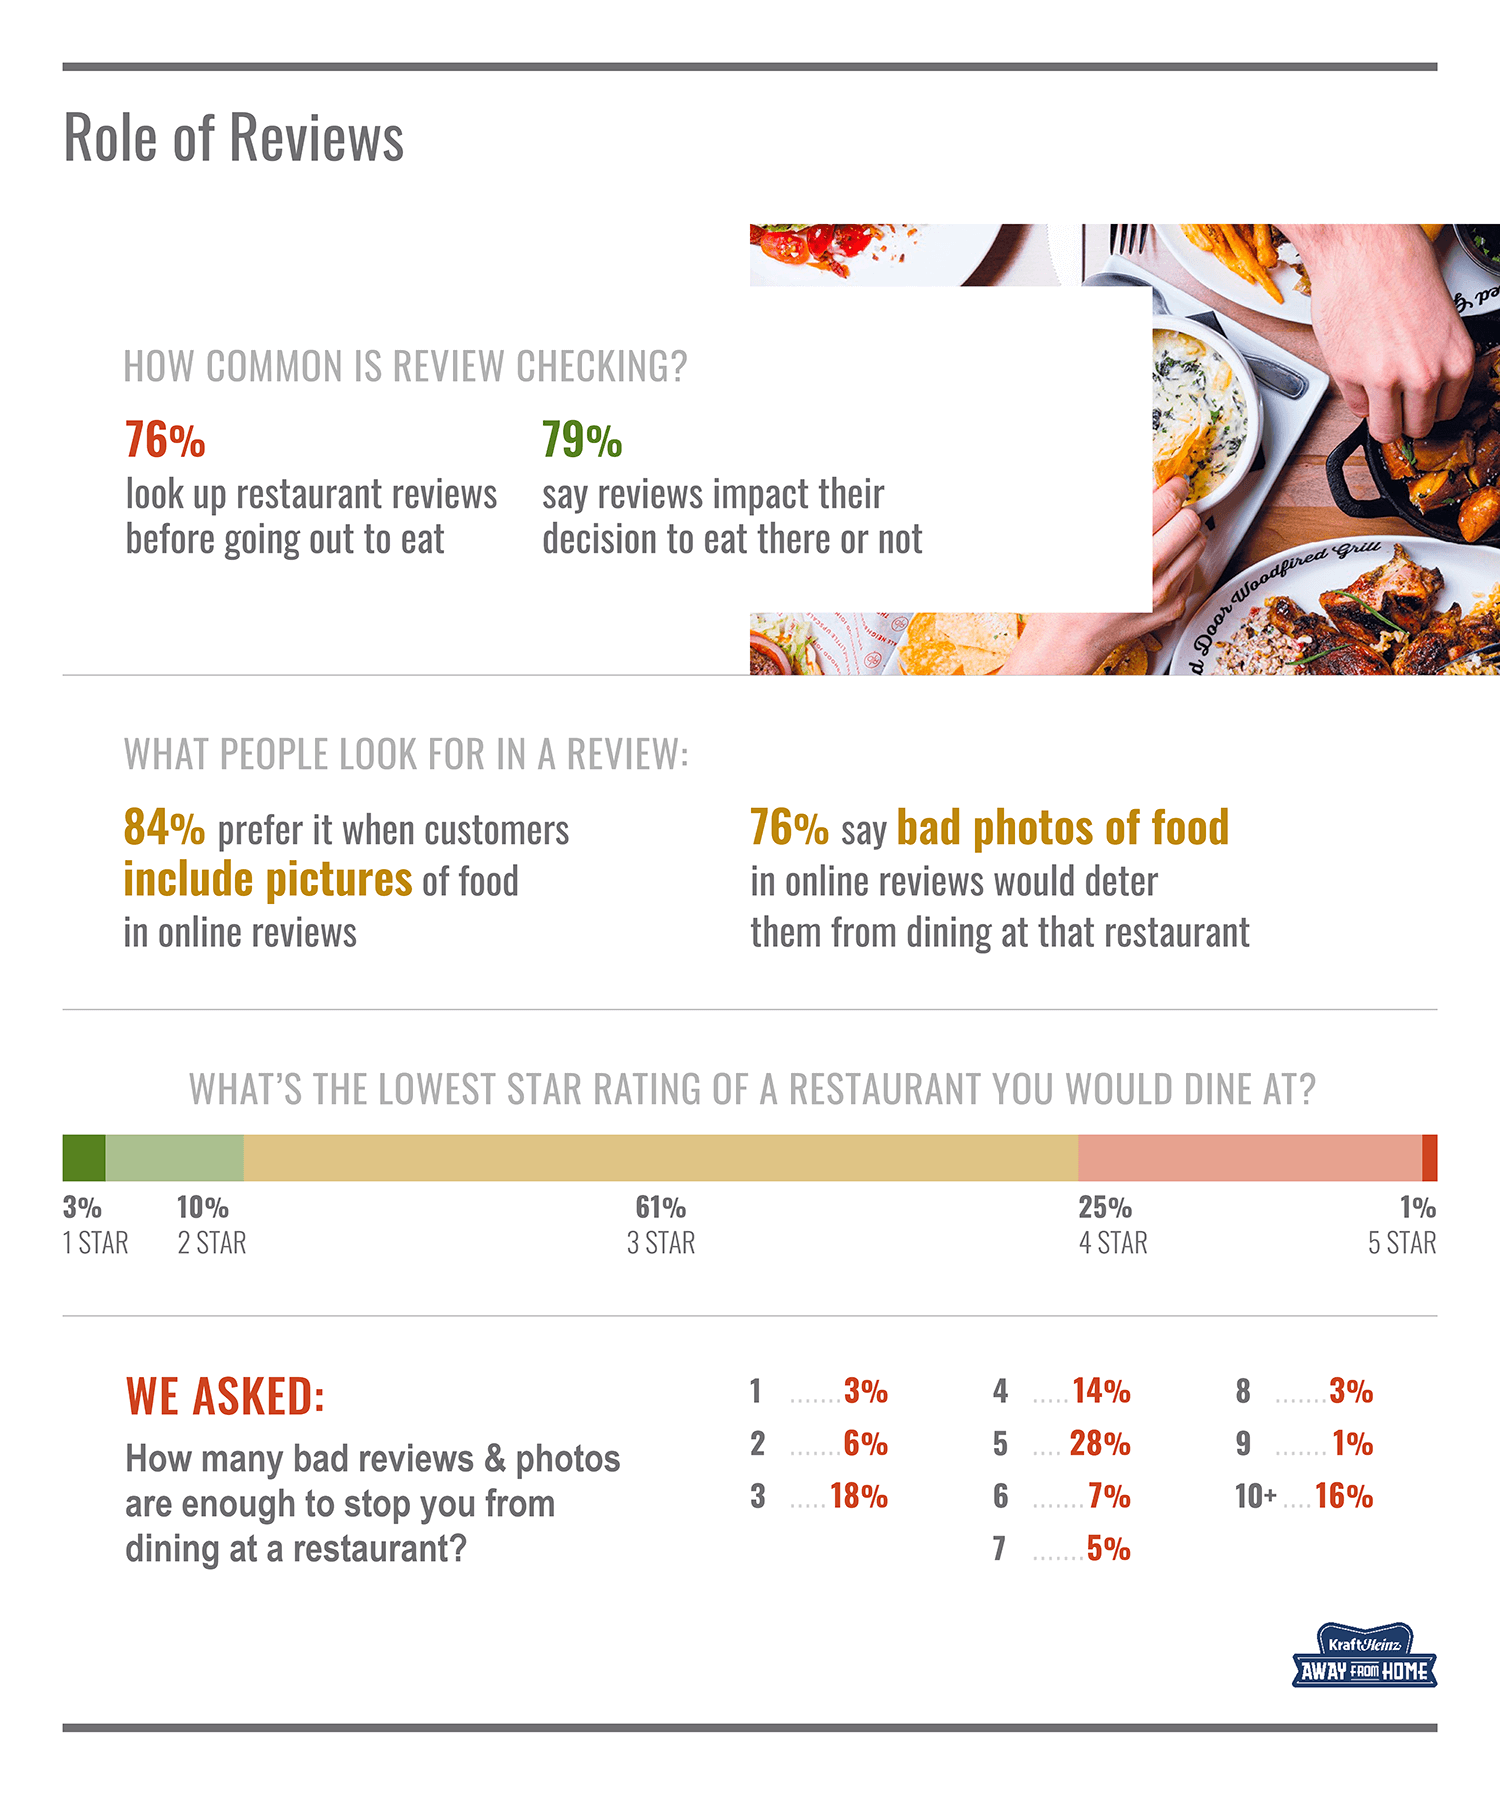 A look at the impact of restaurant reviews on American dining habits - study from usfoods.com